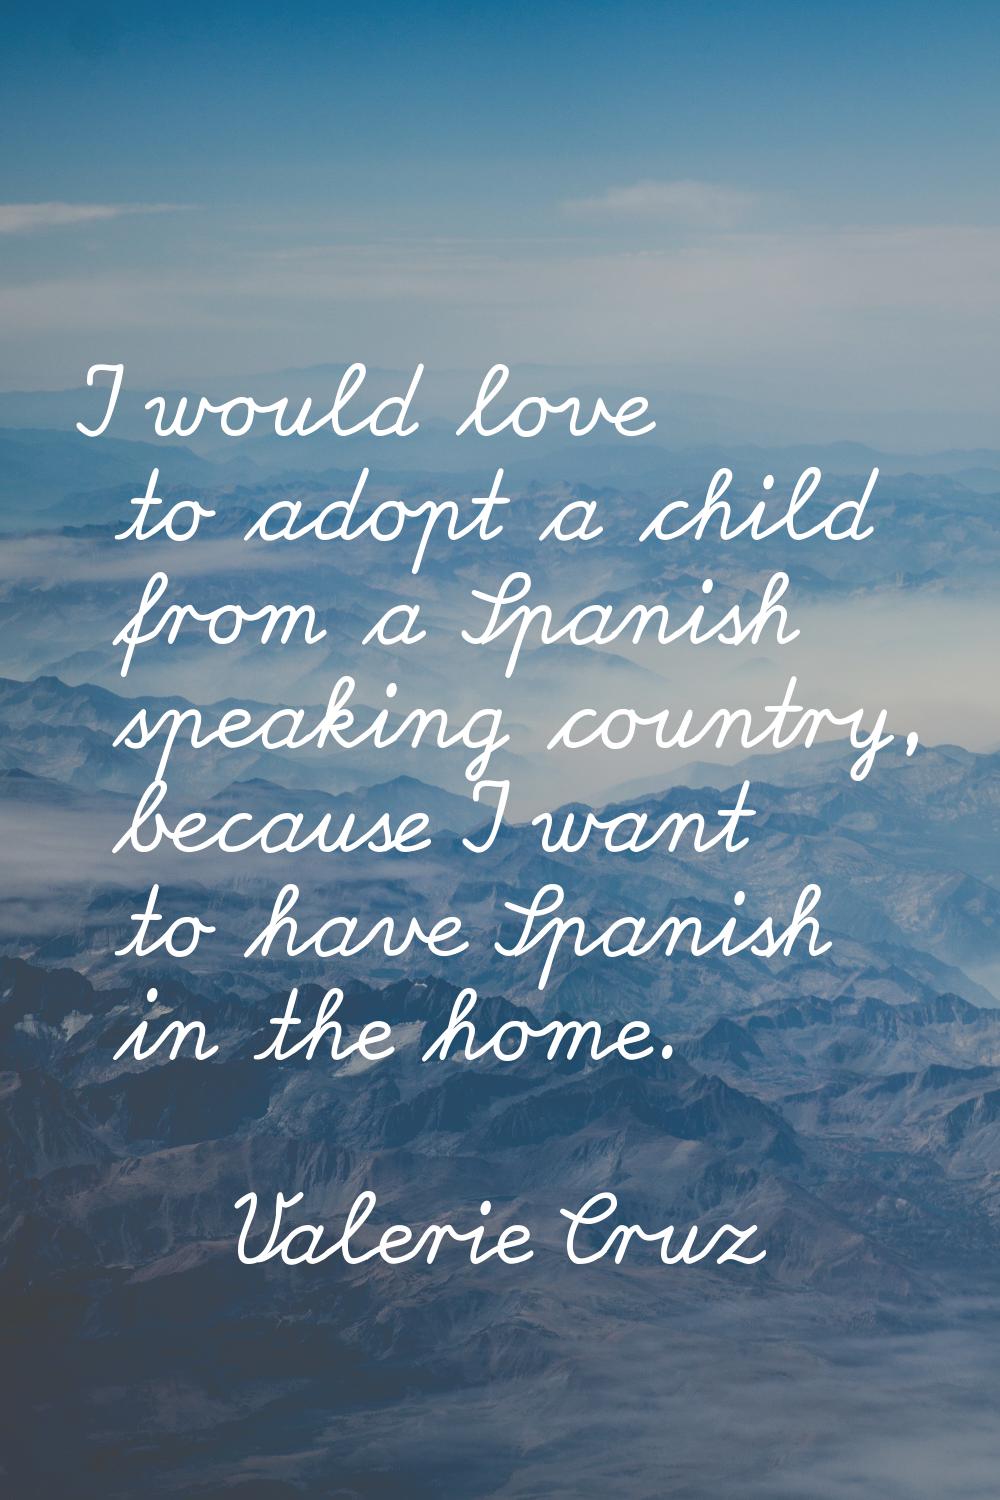 I would love to adopt a child from a Spanish speaking country, because I want to have Spanish in th